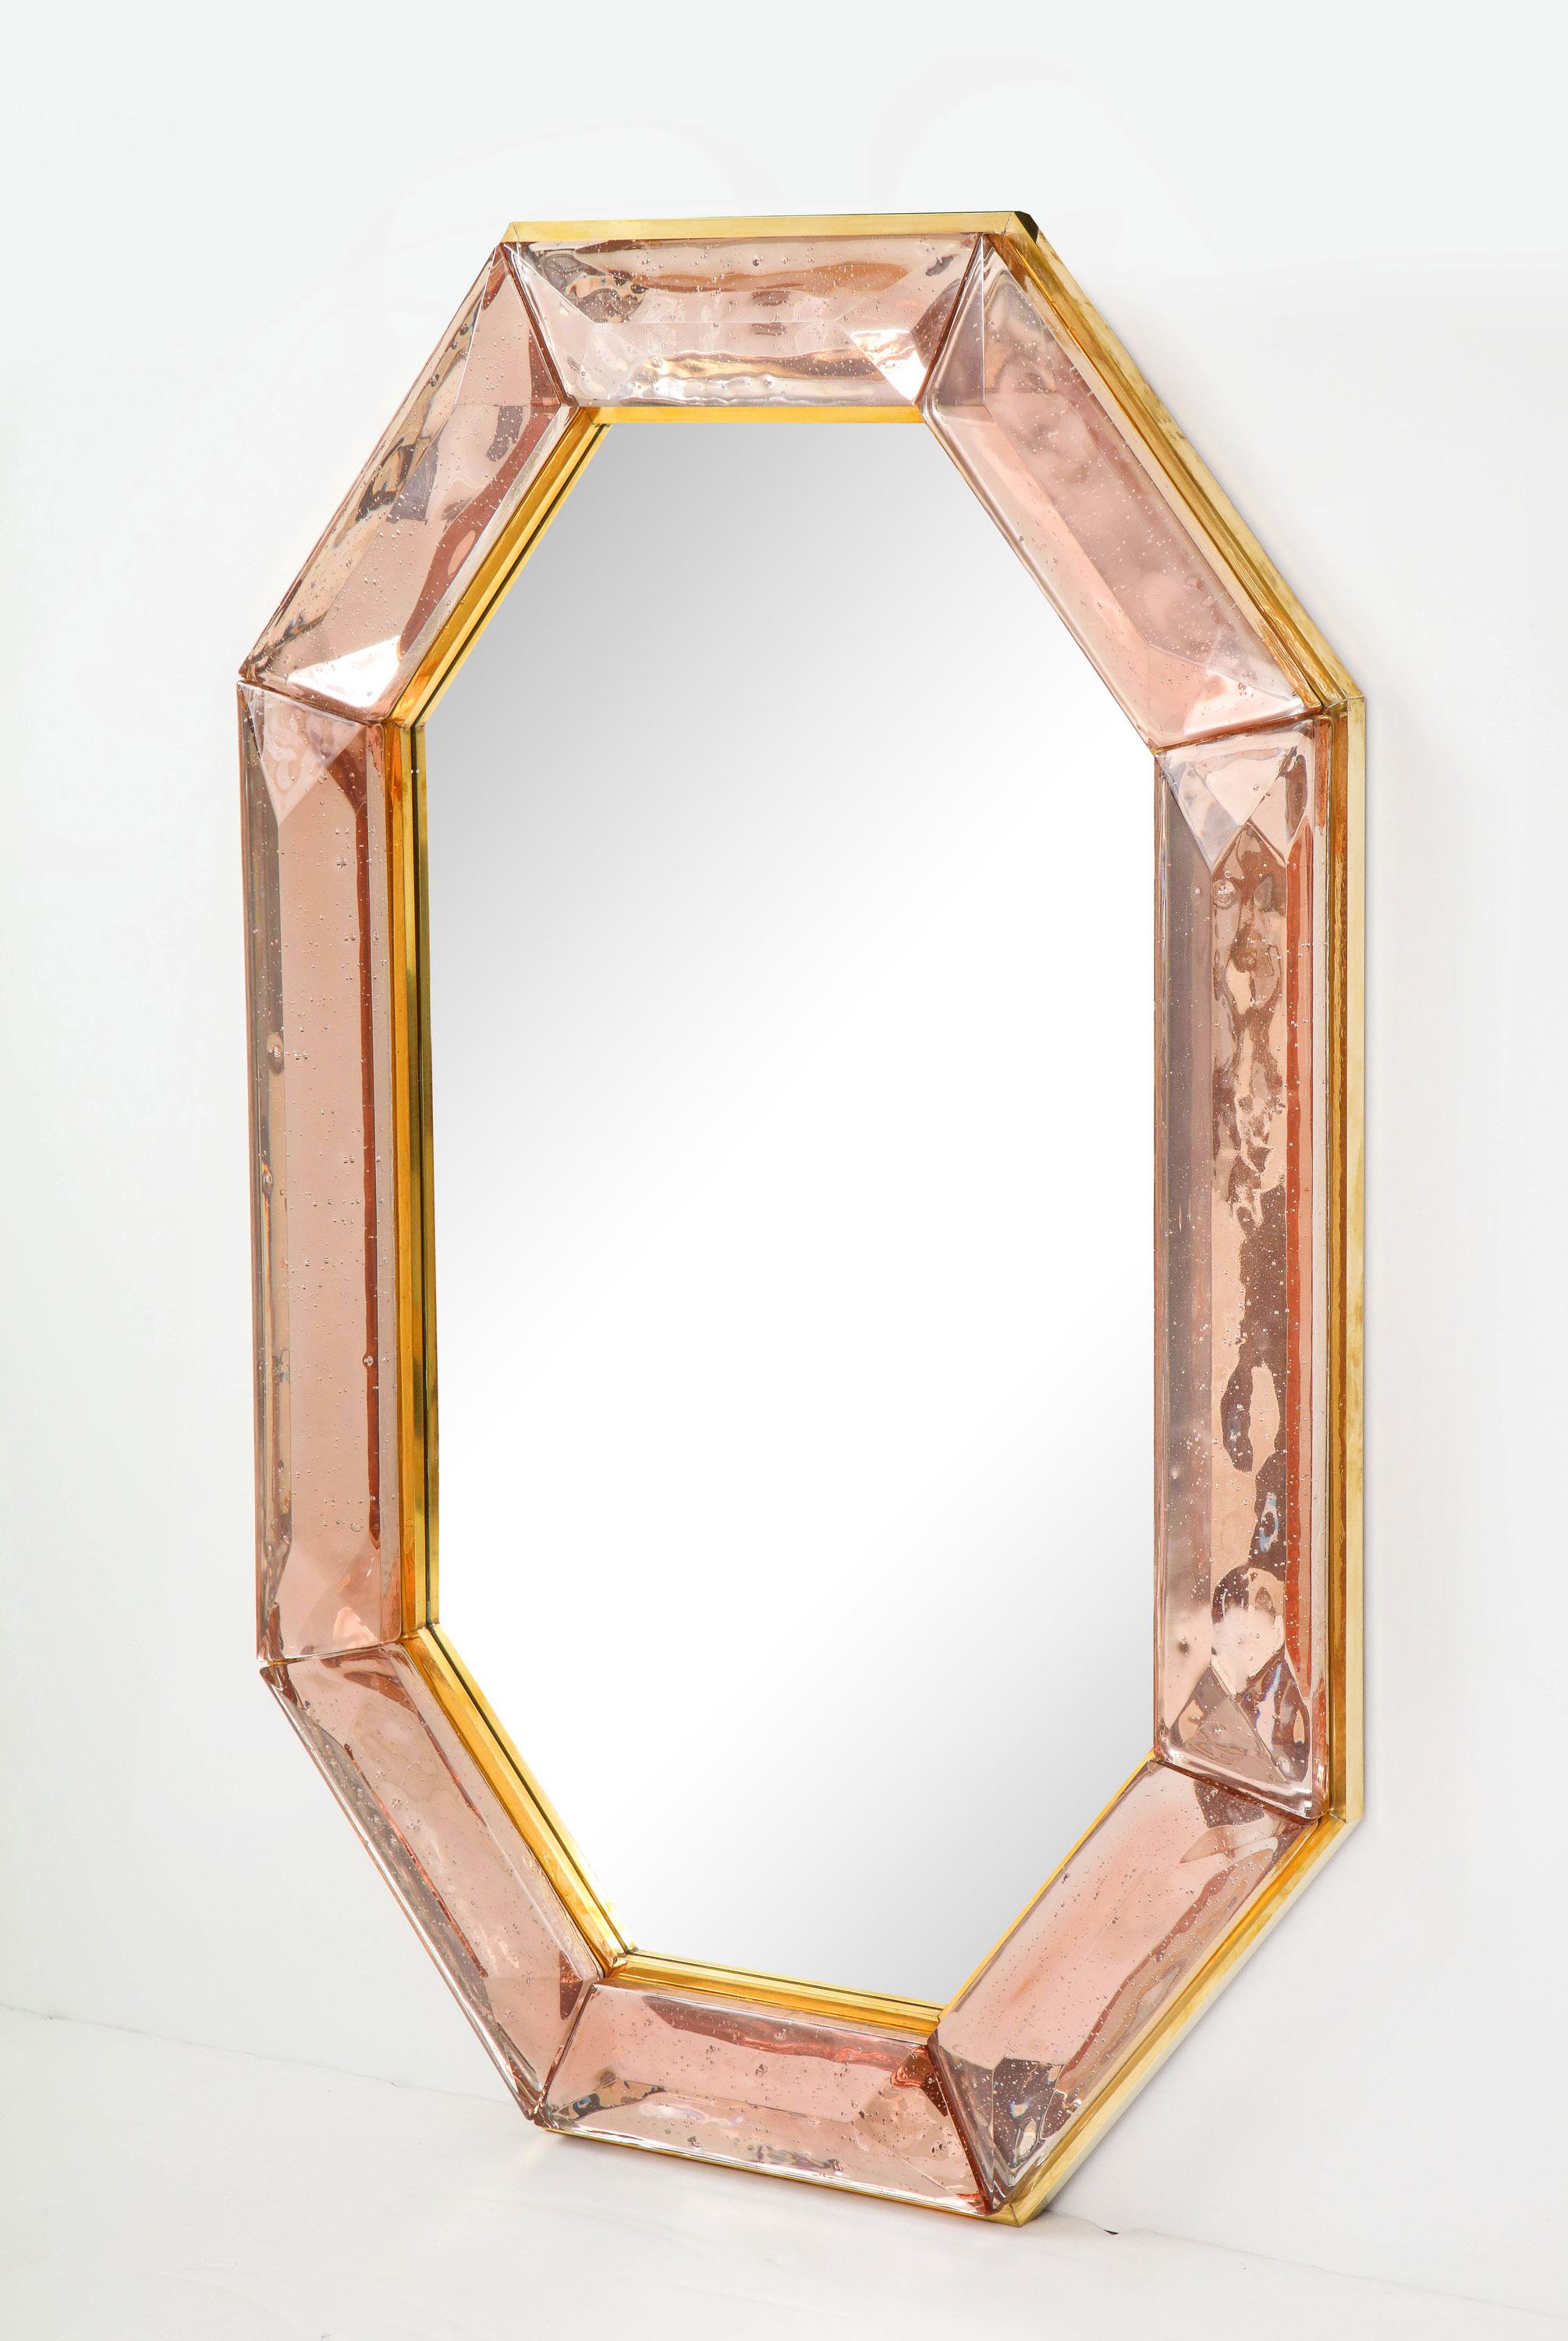 Pair of bespoke octagon pink Murano glass mirrors, in stock
Vivid and intense pink glass block with naturally occurring air inclusions throughout
Highly polished faceted pattern
Brass gallery all around
Each mirror is a unique luxury handcrafted by